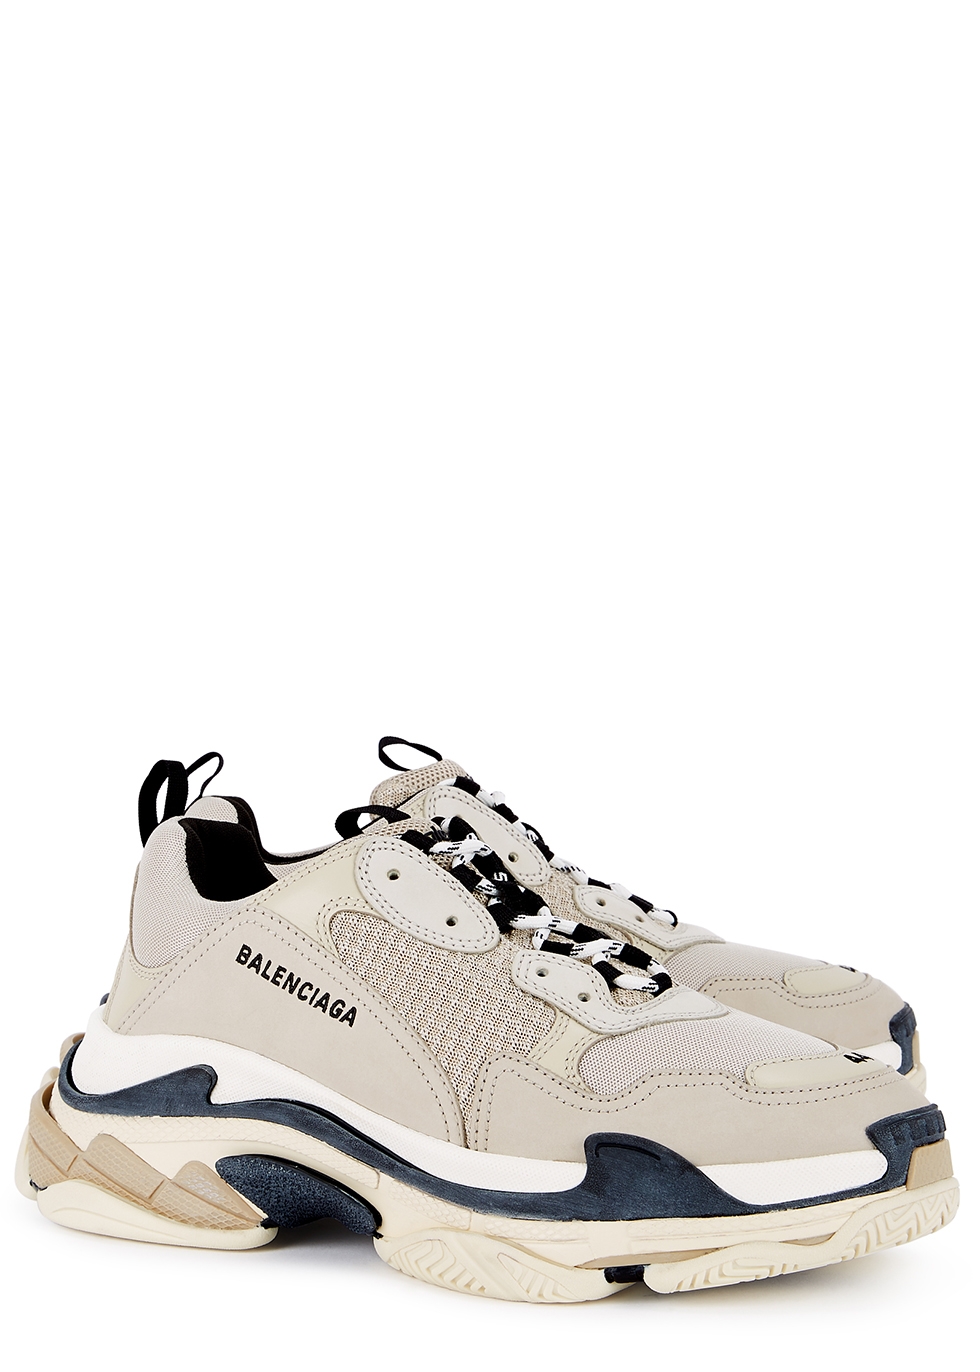 Whole Details Review On Balenciaga 19SS Triple S Clear